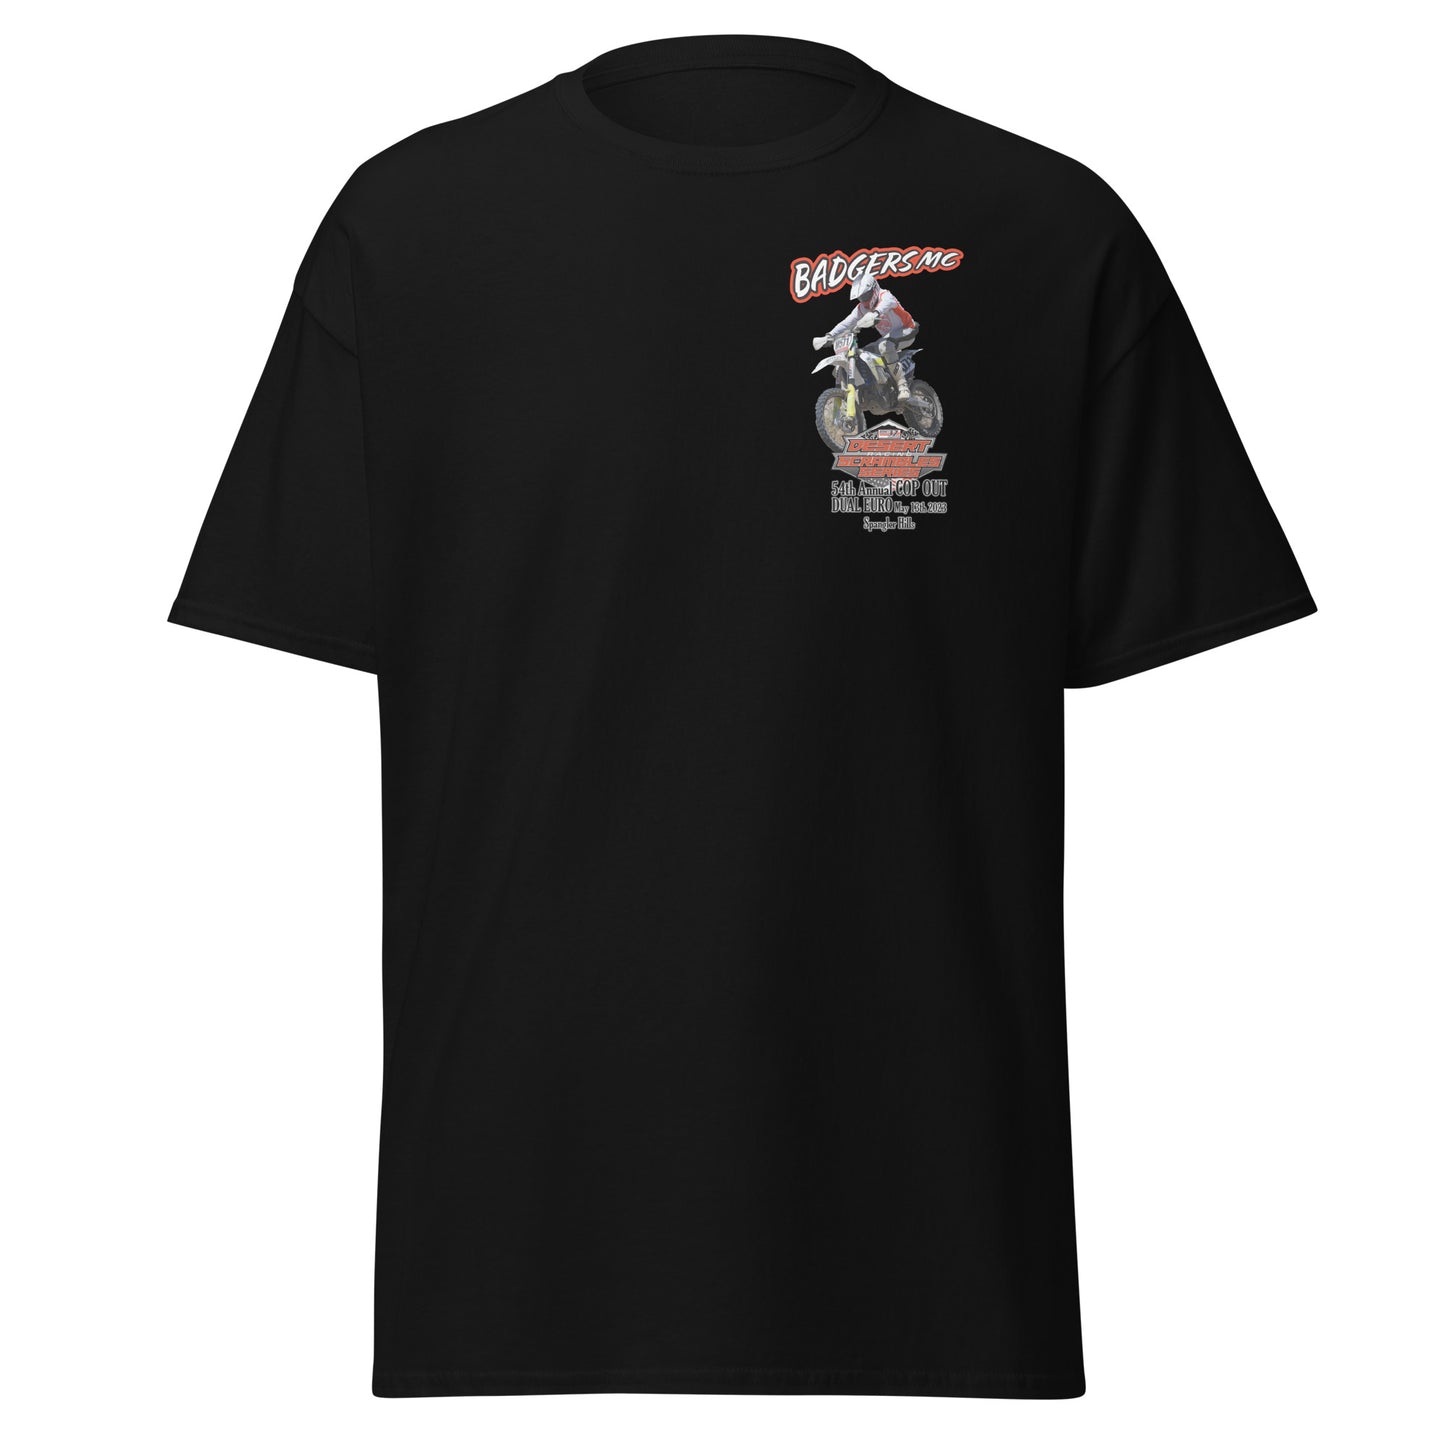 Badgers MC 54th Annual Cop Out Dual Euro Event Shirts - 2023